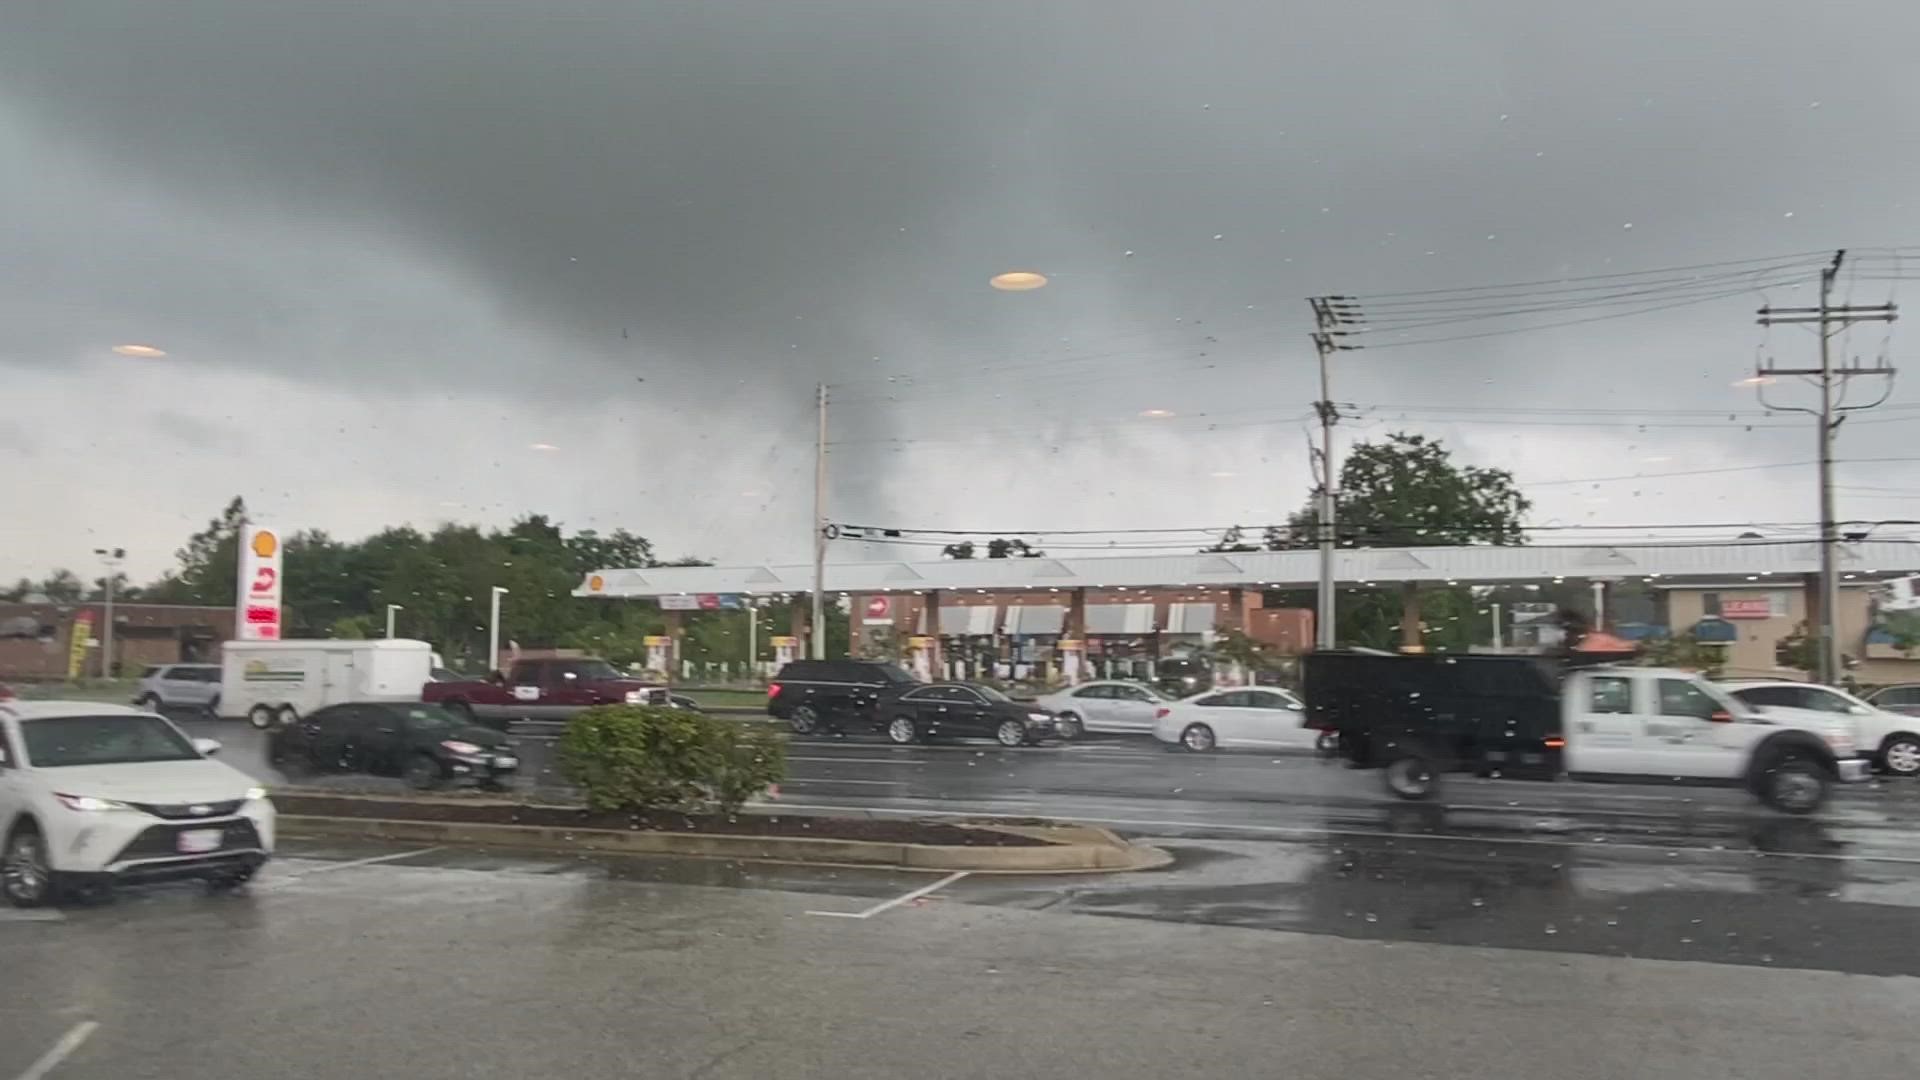 Laura Martien of Mayo, Md., shares her experience of being near a powerful storm that turned into a possible tornado.